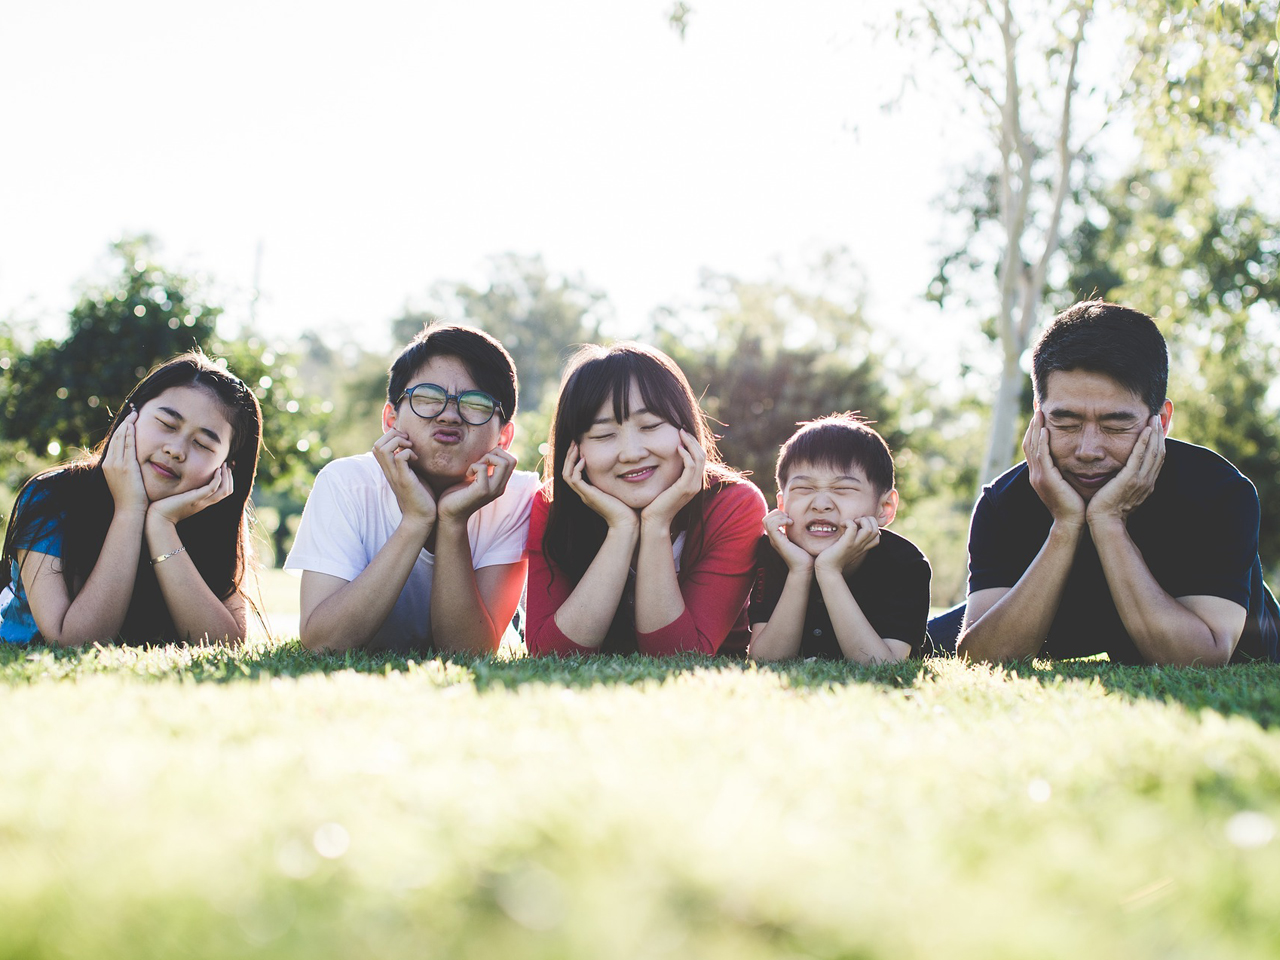 Family of 5 smiling in the grass